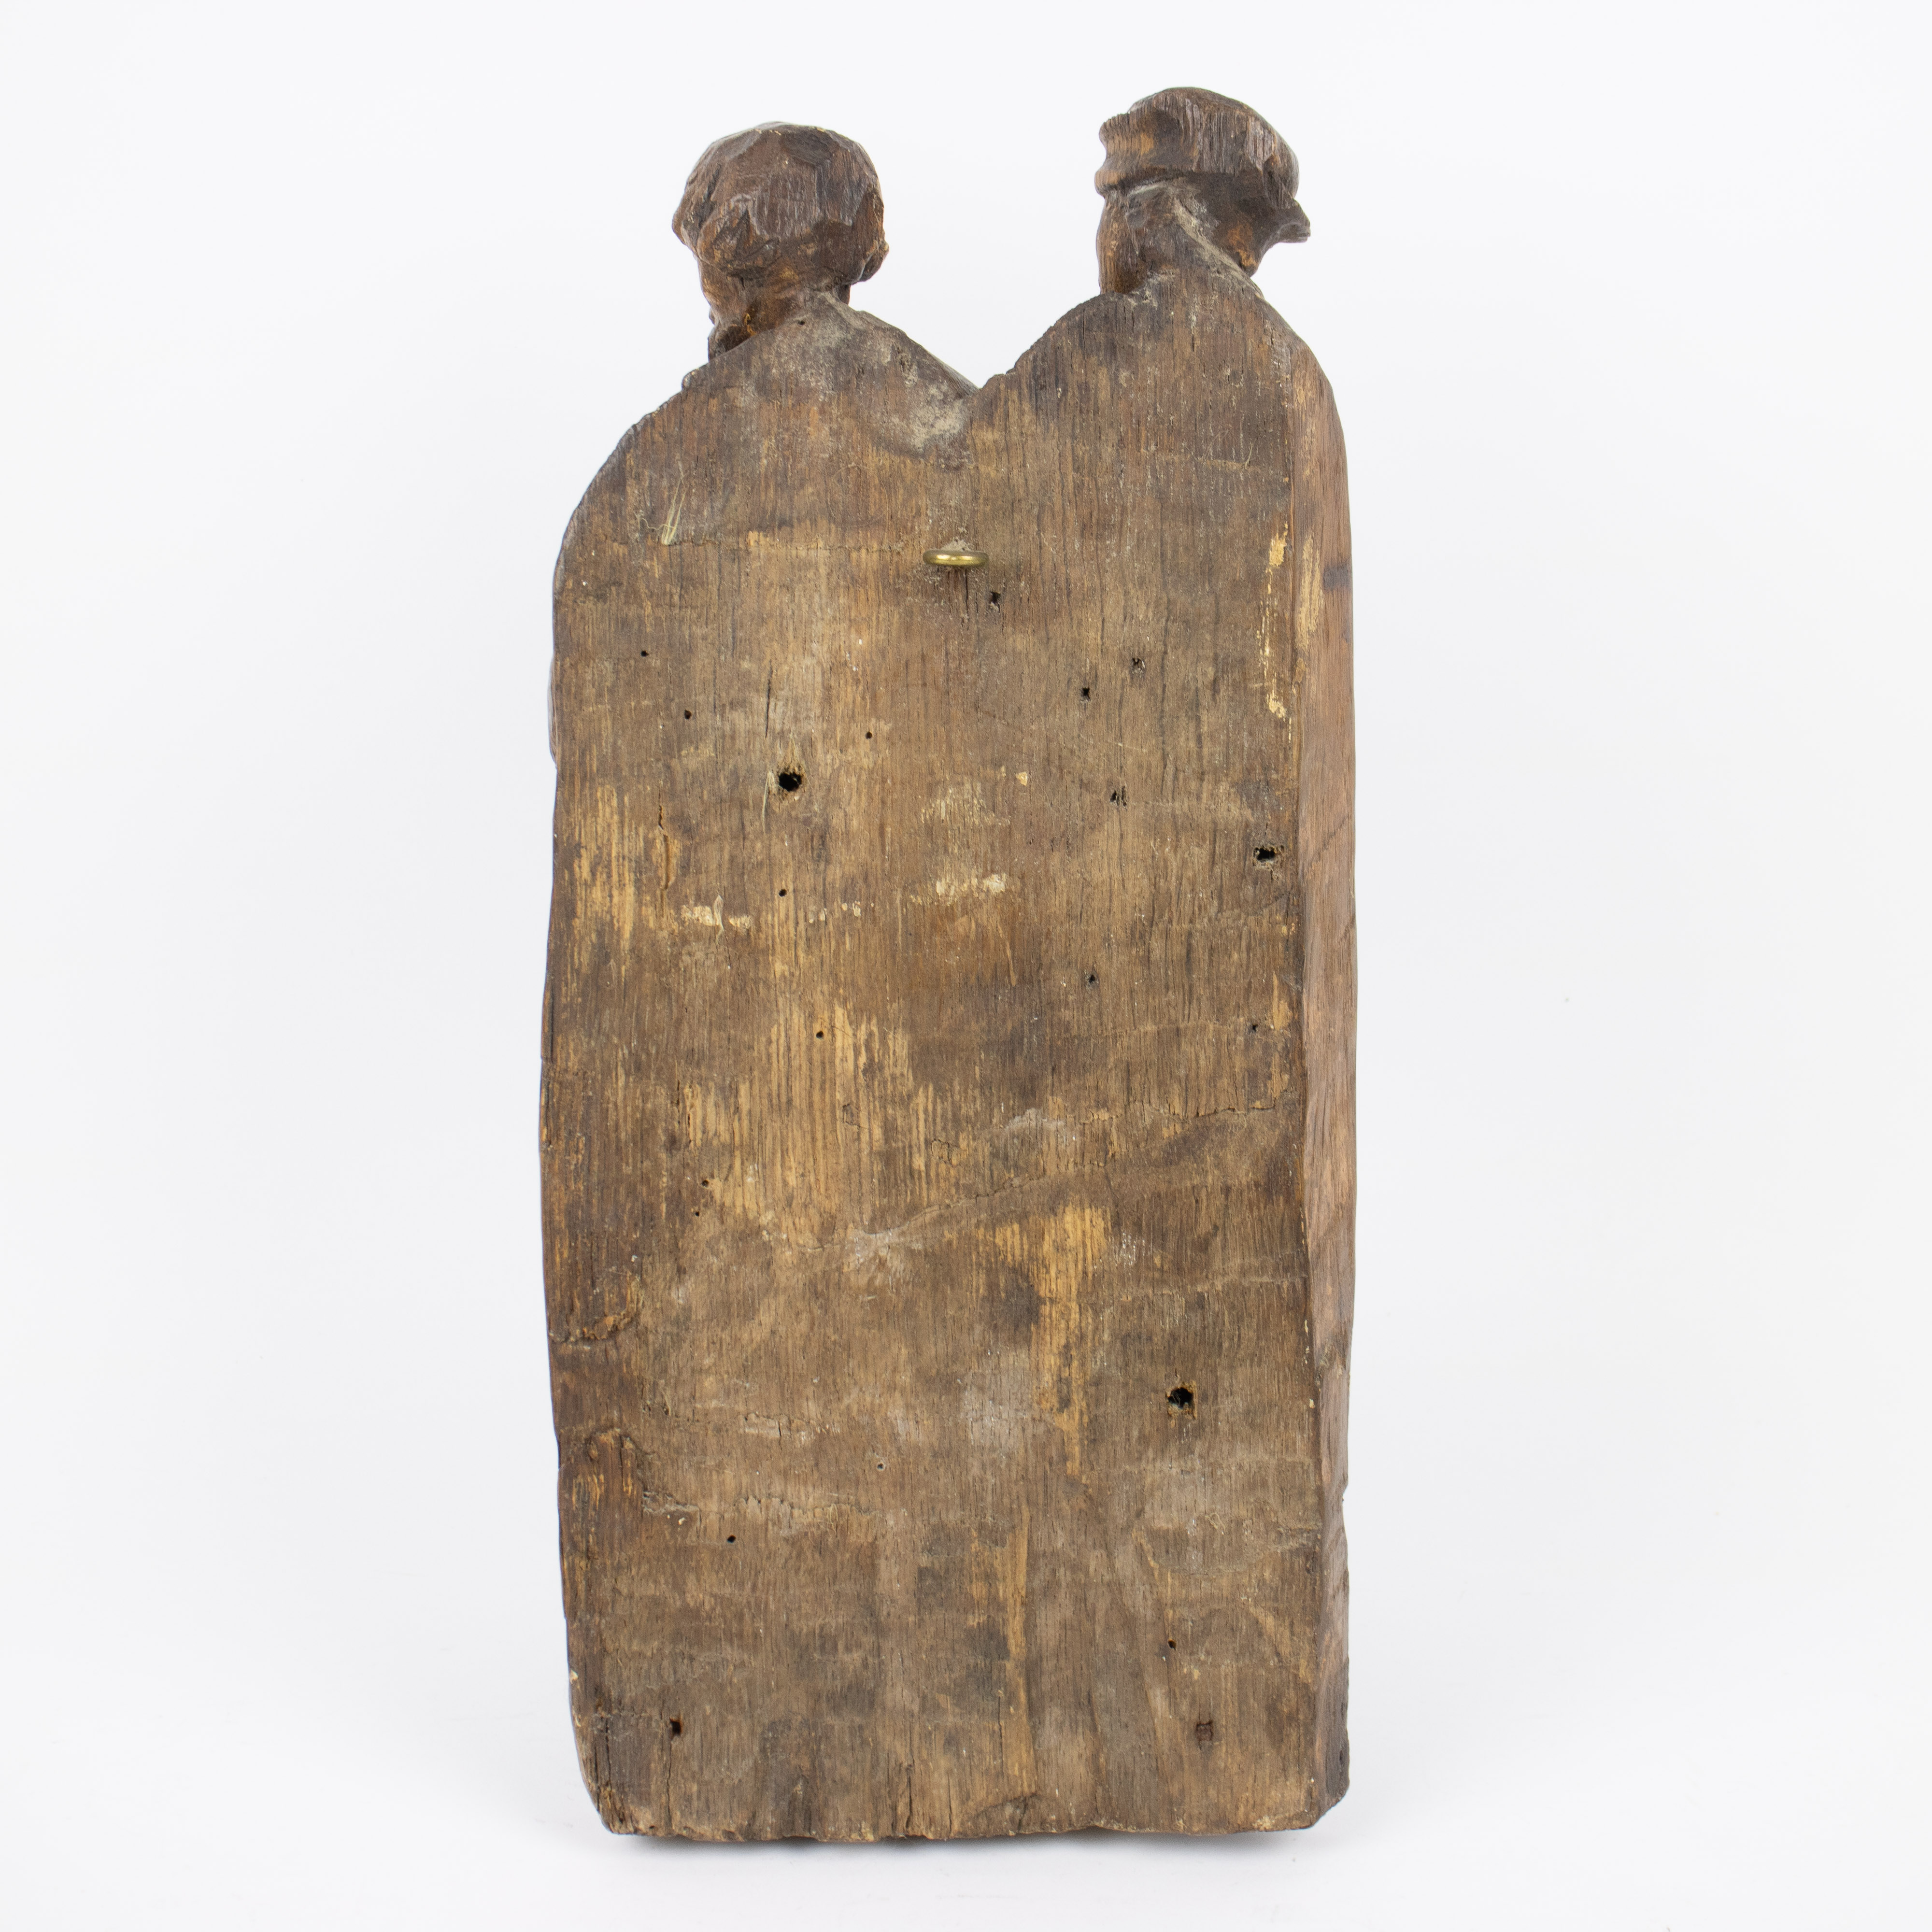 A carved wooden relief of two Saints, Flemish late 15th early 16th century - Image 6 of 9